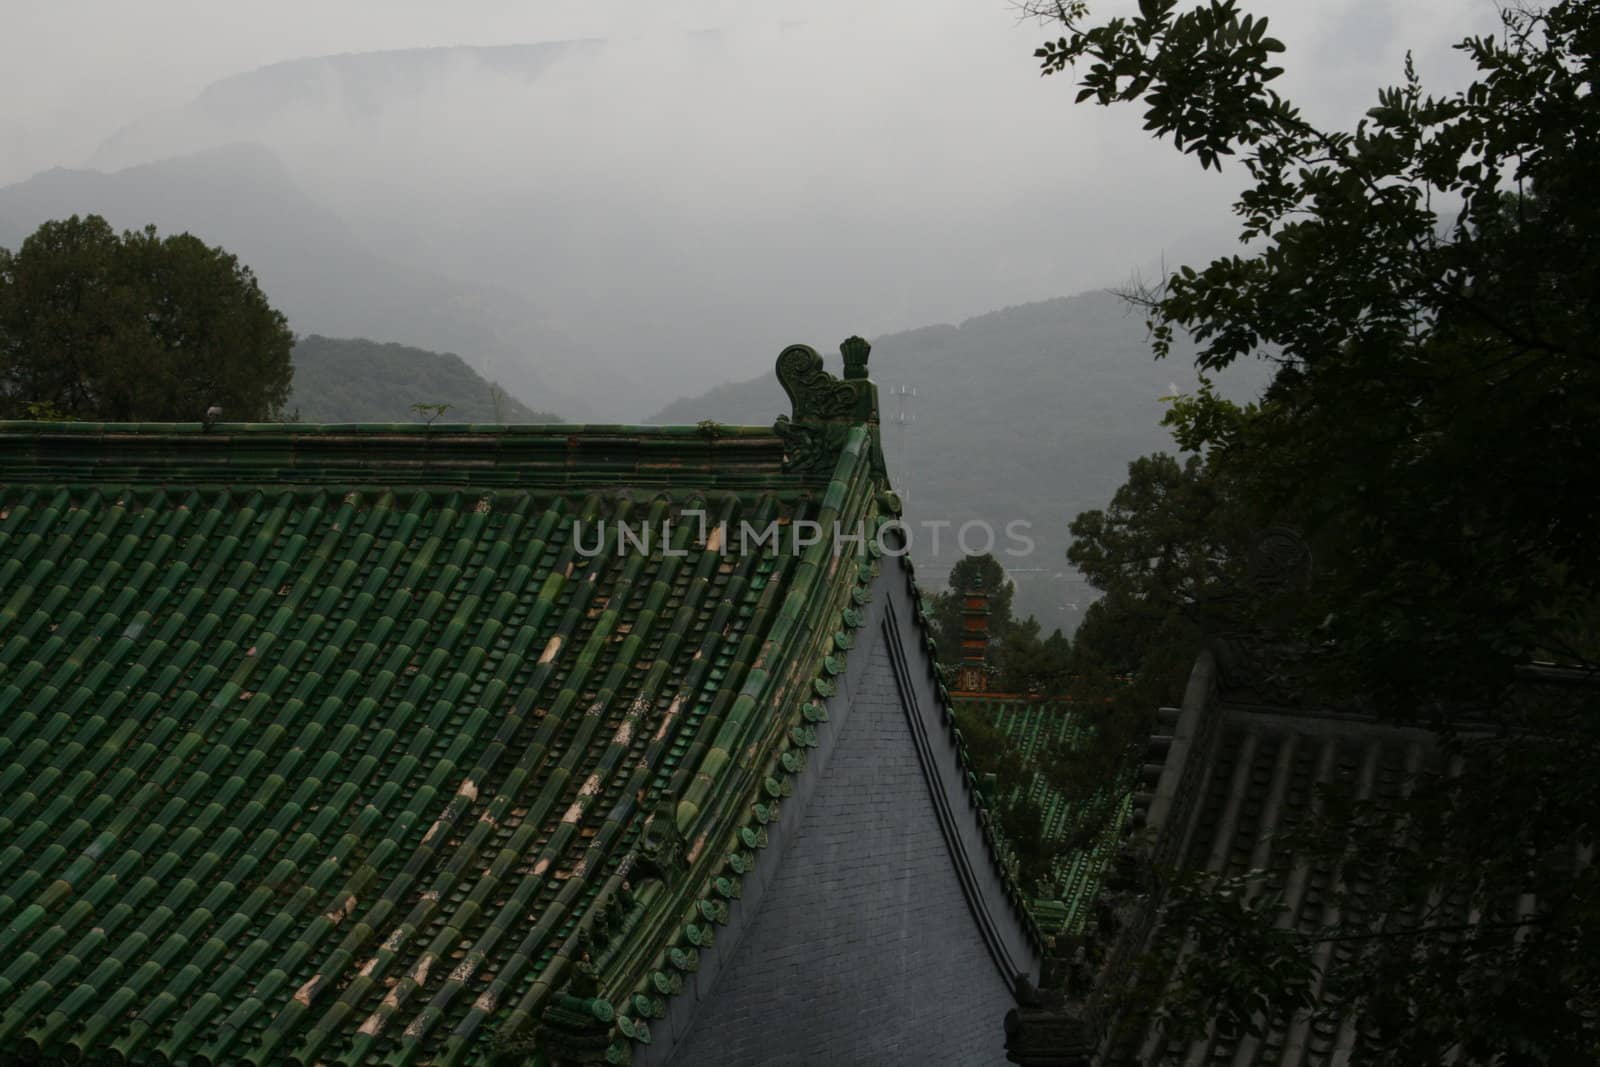 View over the rooftops in the landscape at Shaolin Temple, China